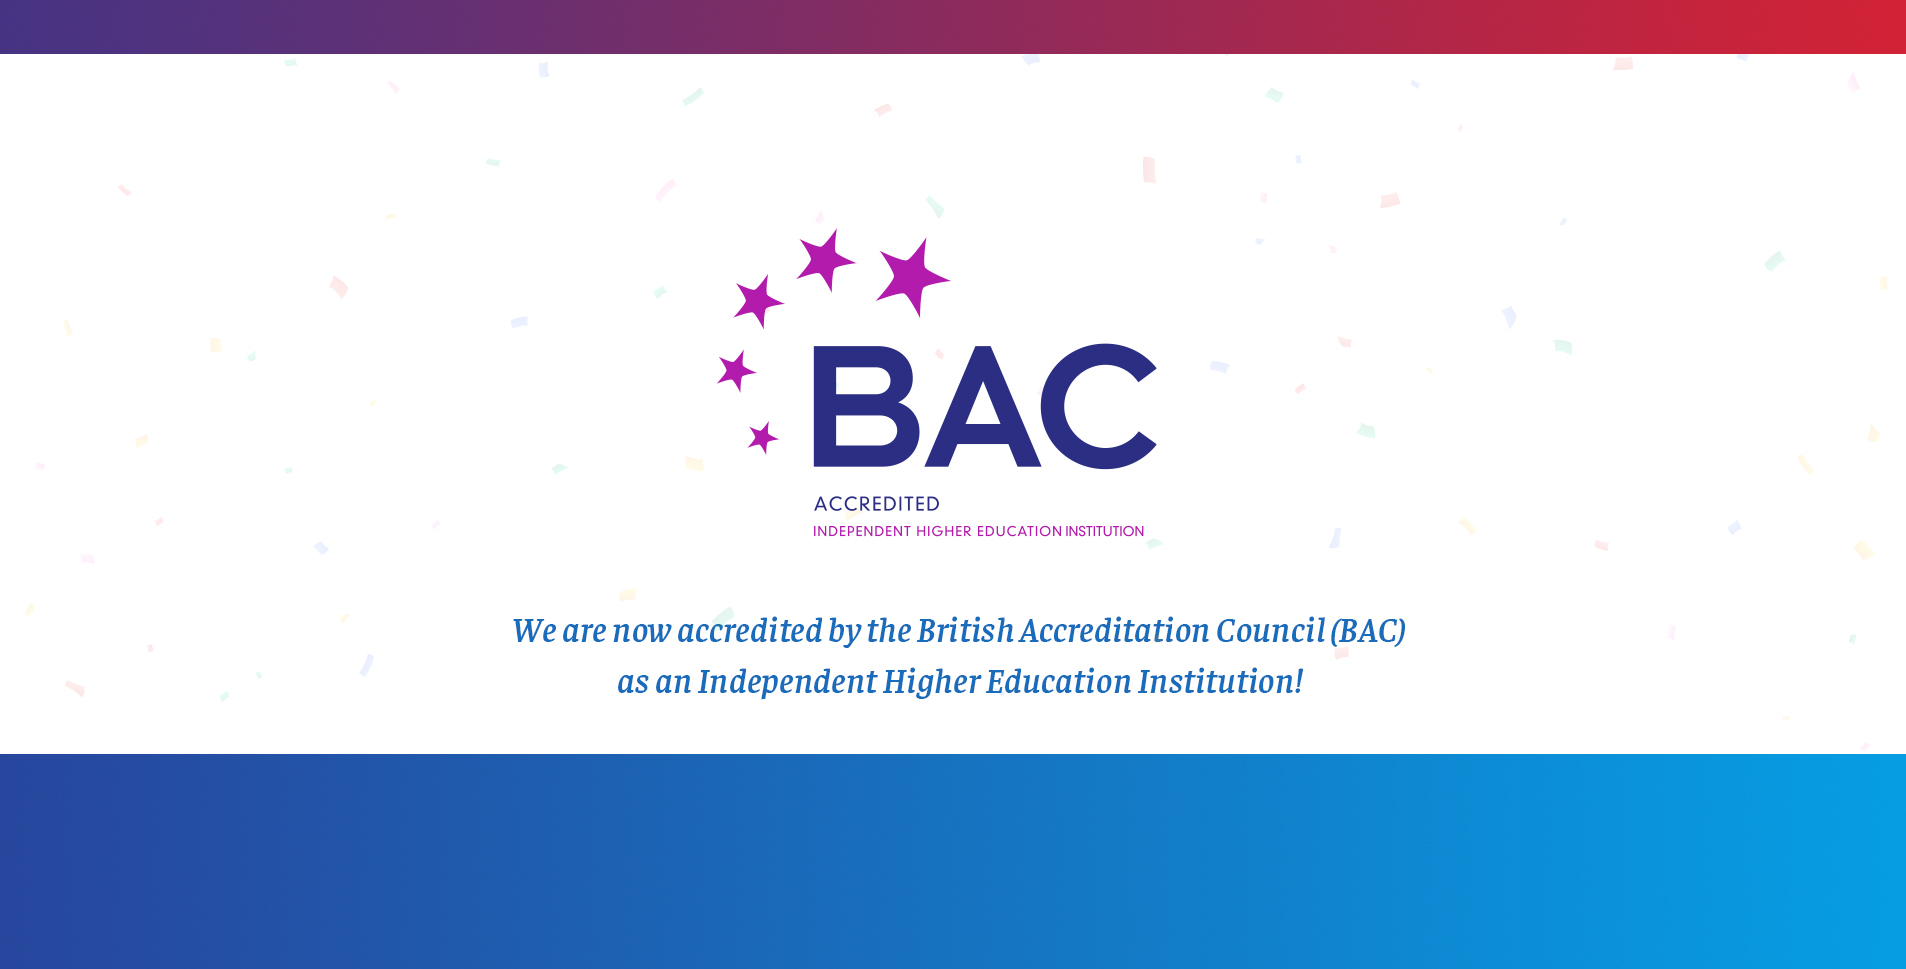 TBC accredited by the British Accreditation Council as an Independent Higher Education Institution